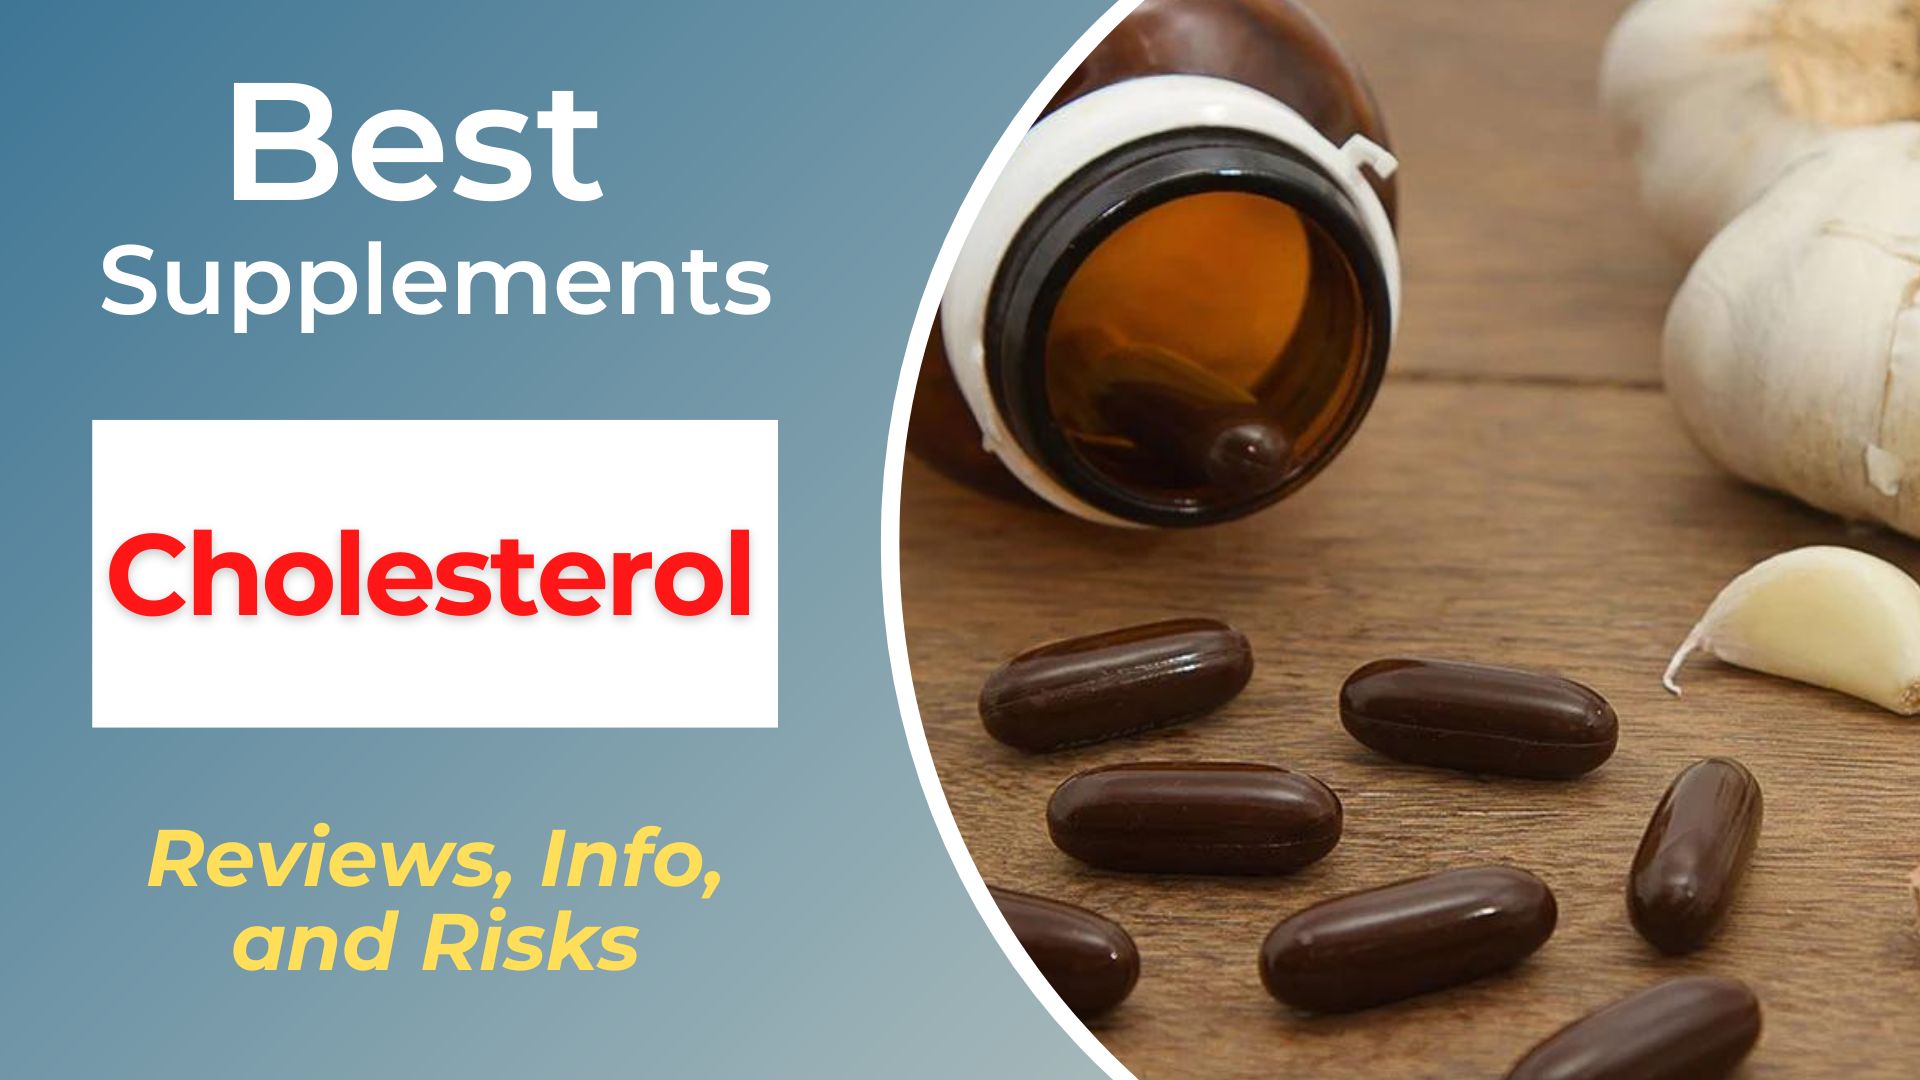 Best Supplements for Cholesterol